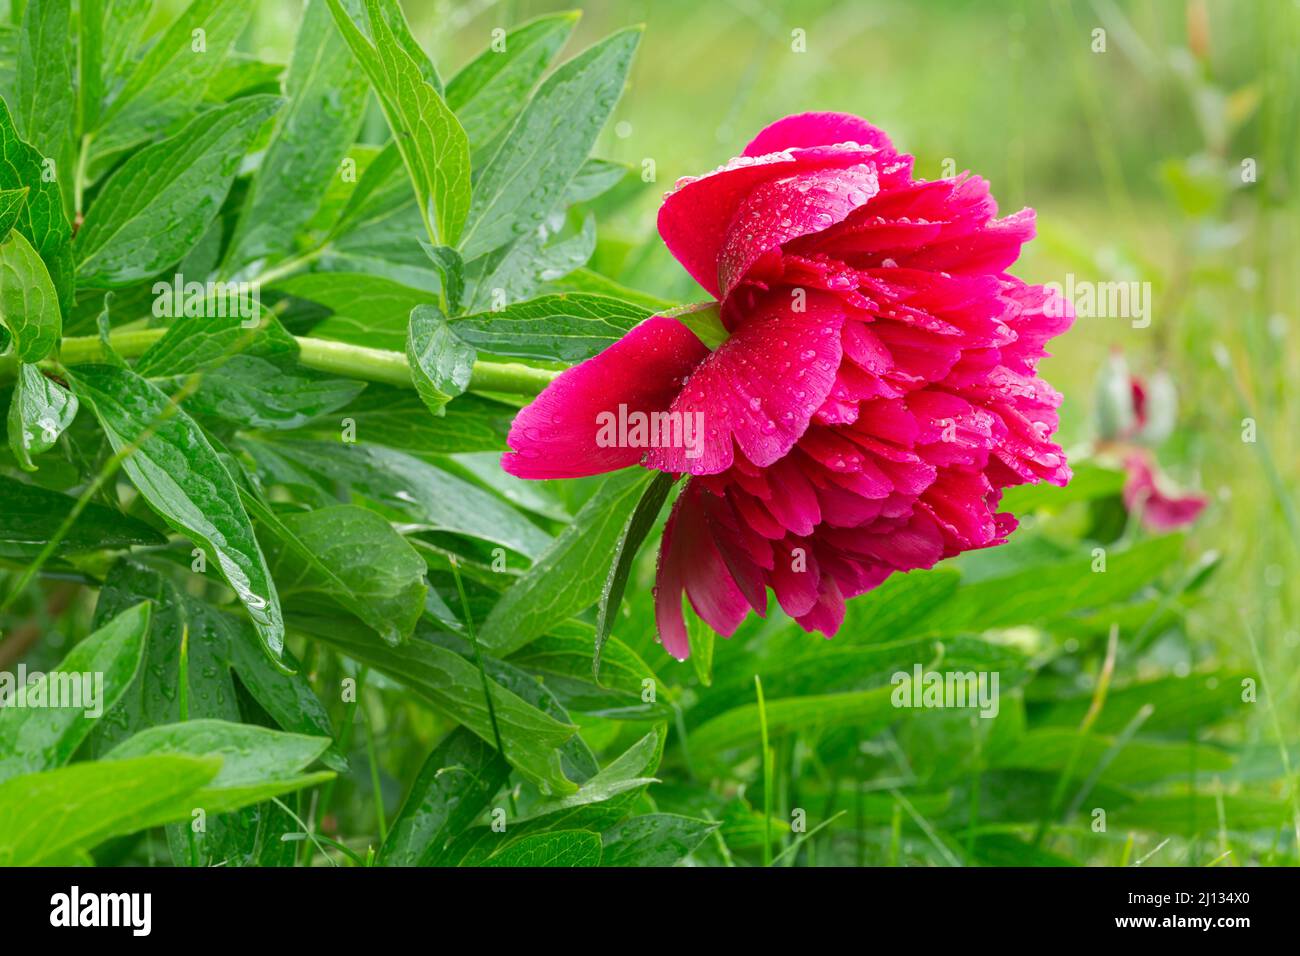 Wet blooming peony or paeonia flower, horizontal composion. Stock Photo